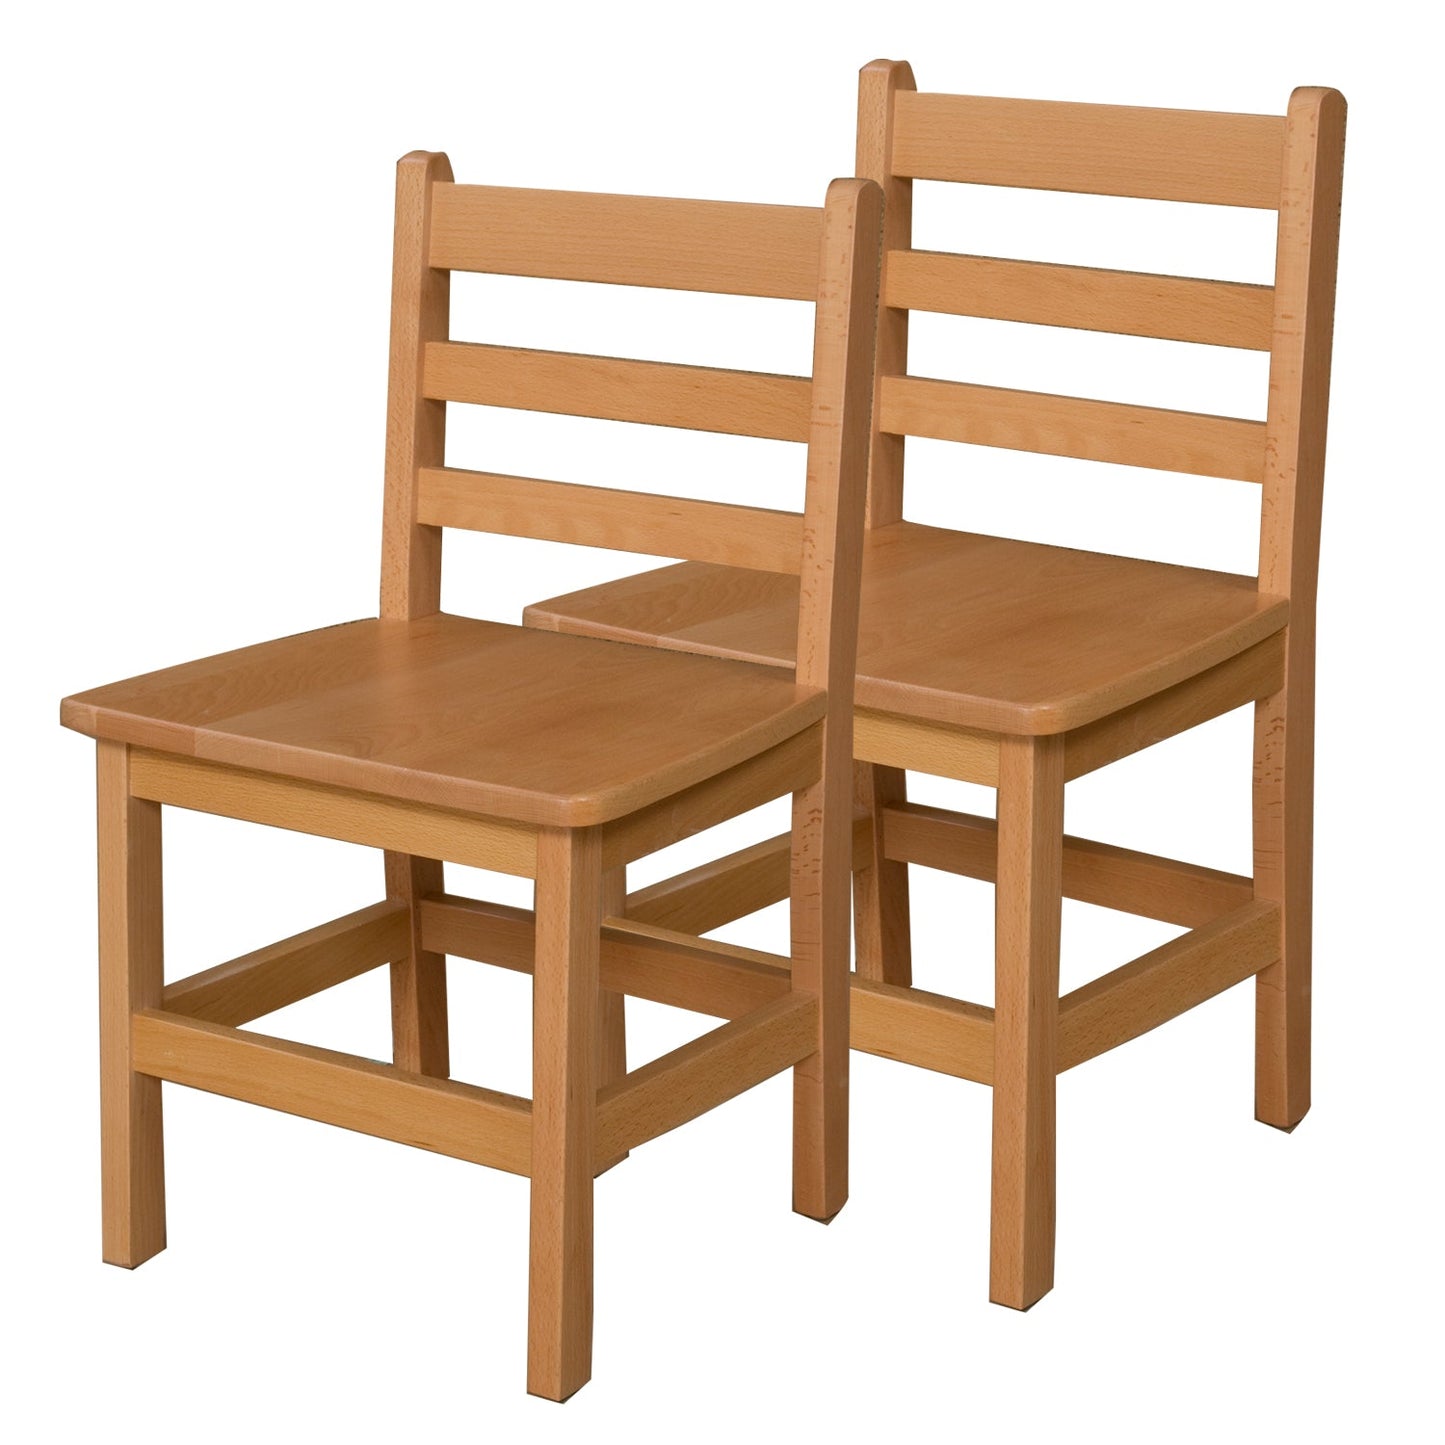 Wood Designs 15" Chair, Carton of (2) - (81502) - SchoolOutlet